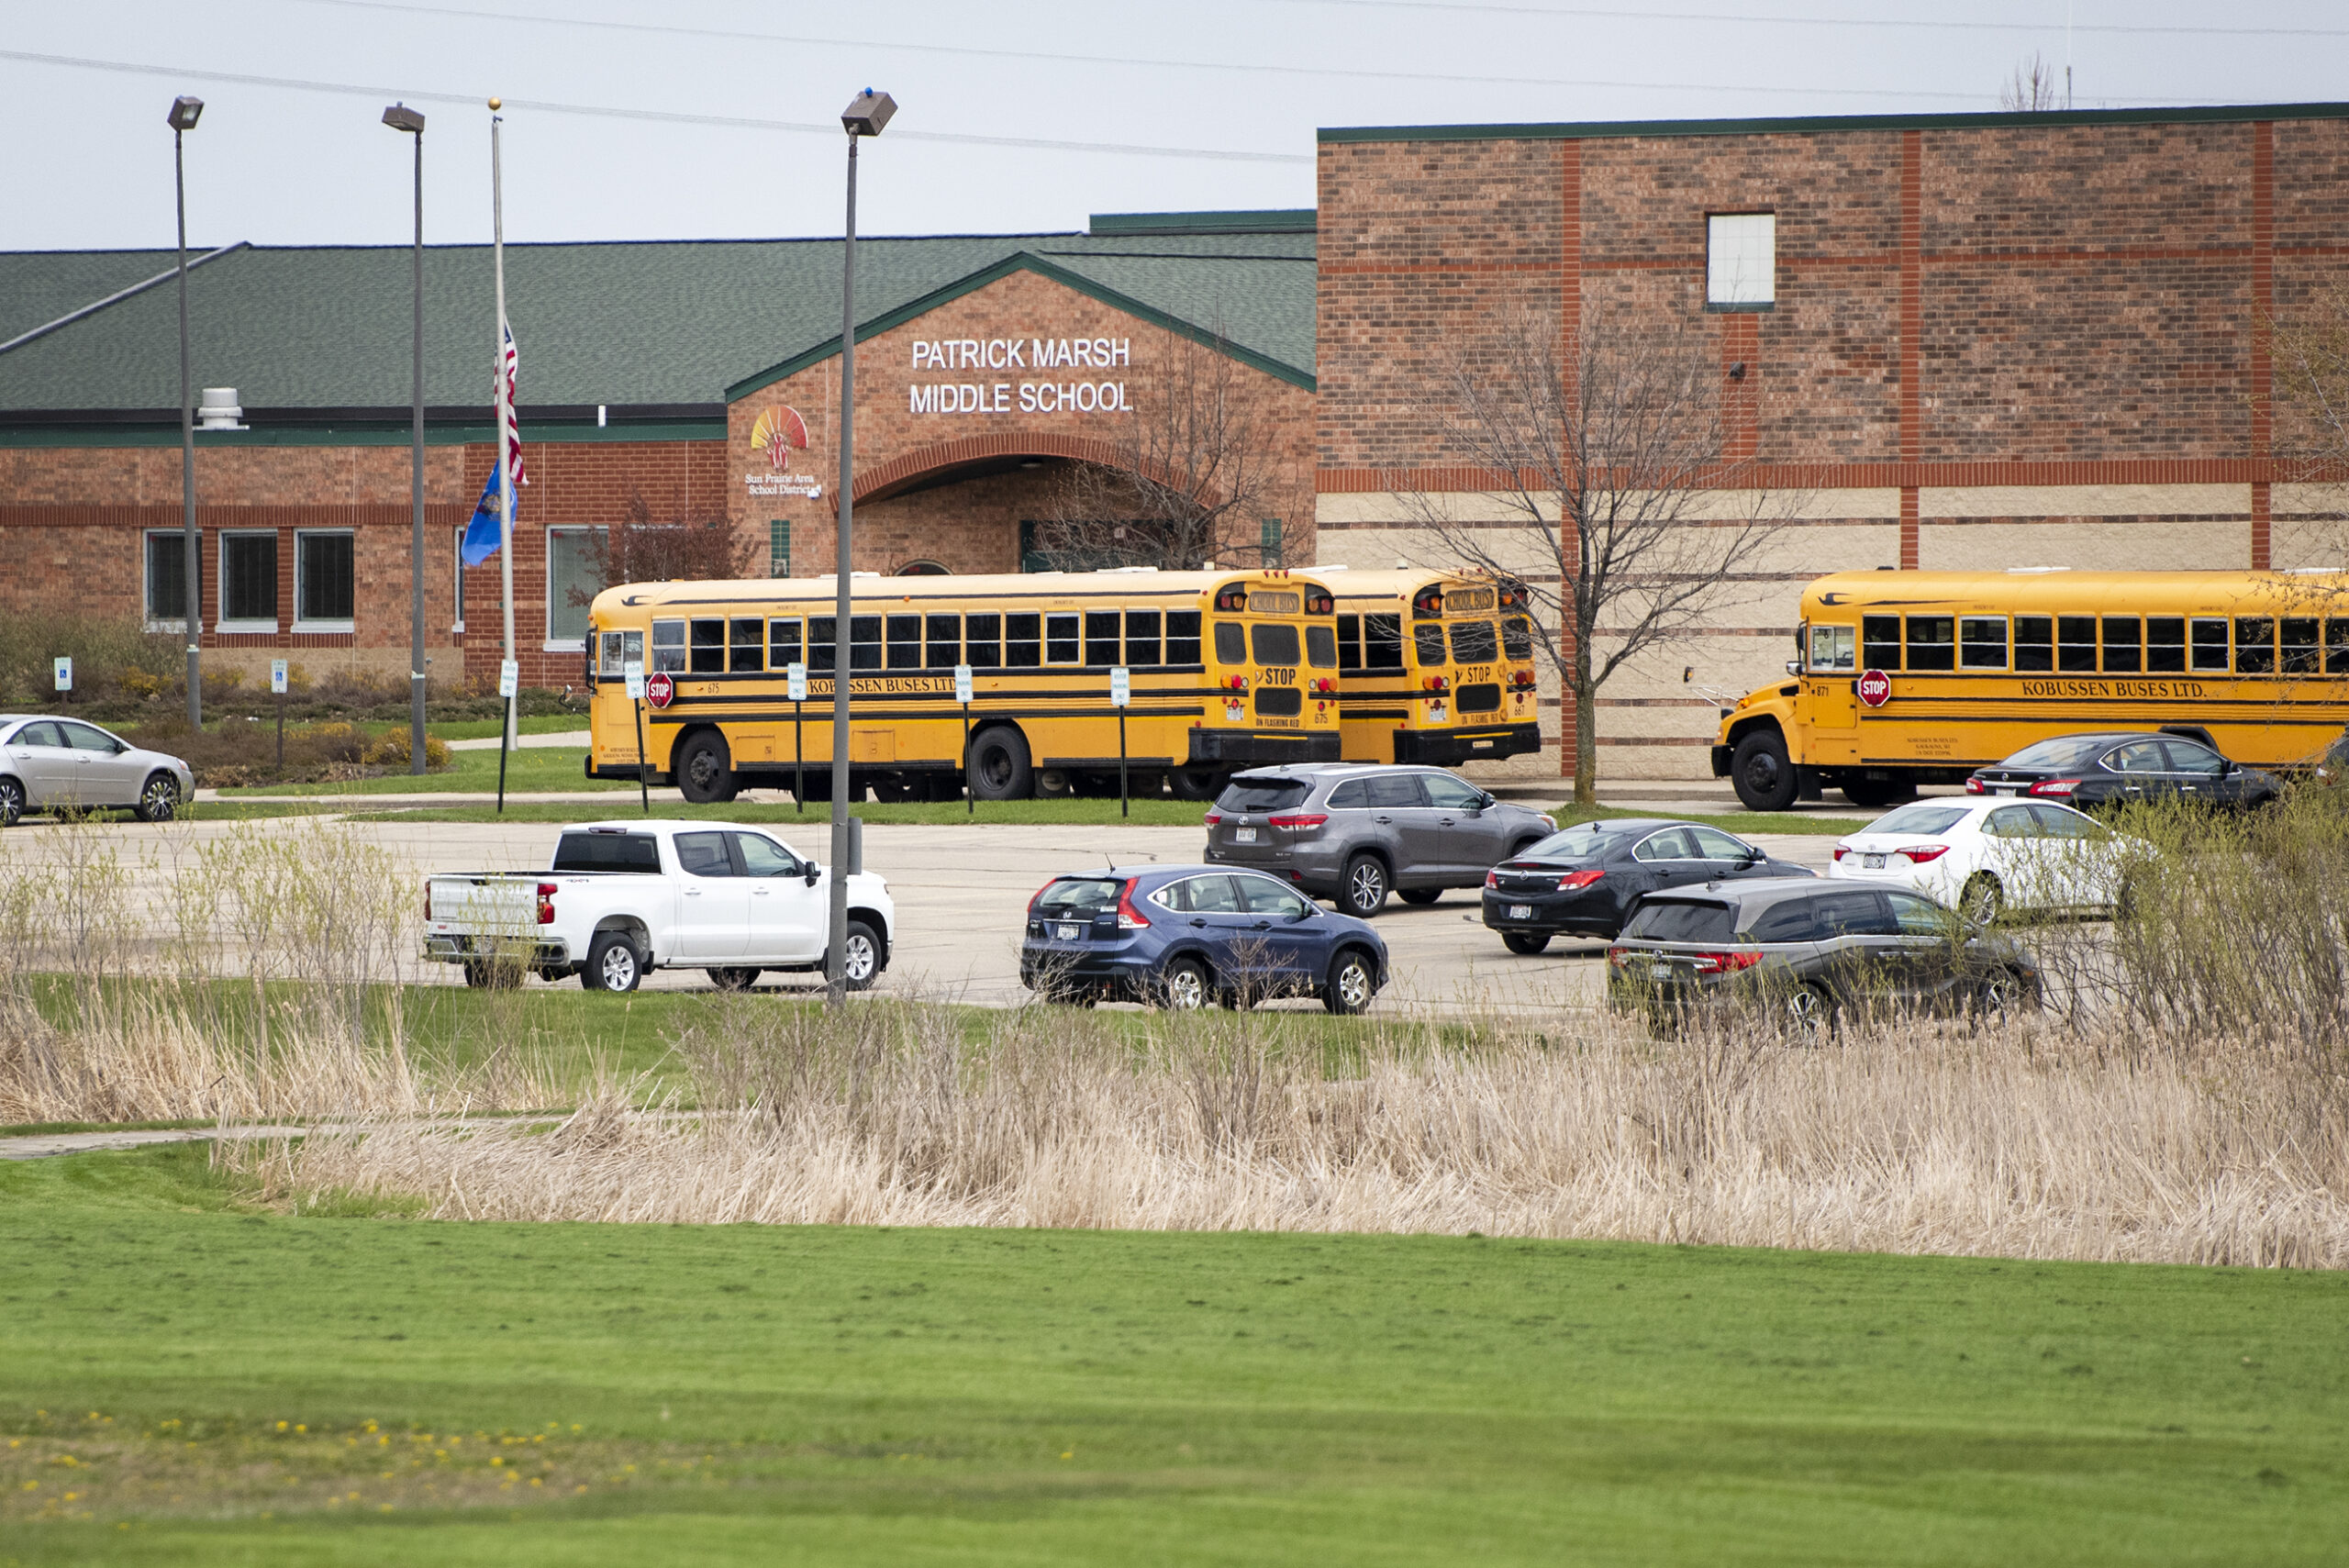 As kids return to school, a shortage of bus drivers remains a challenge for Wisconsin districts